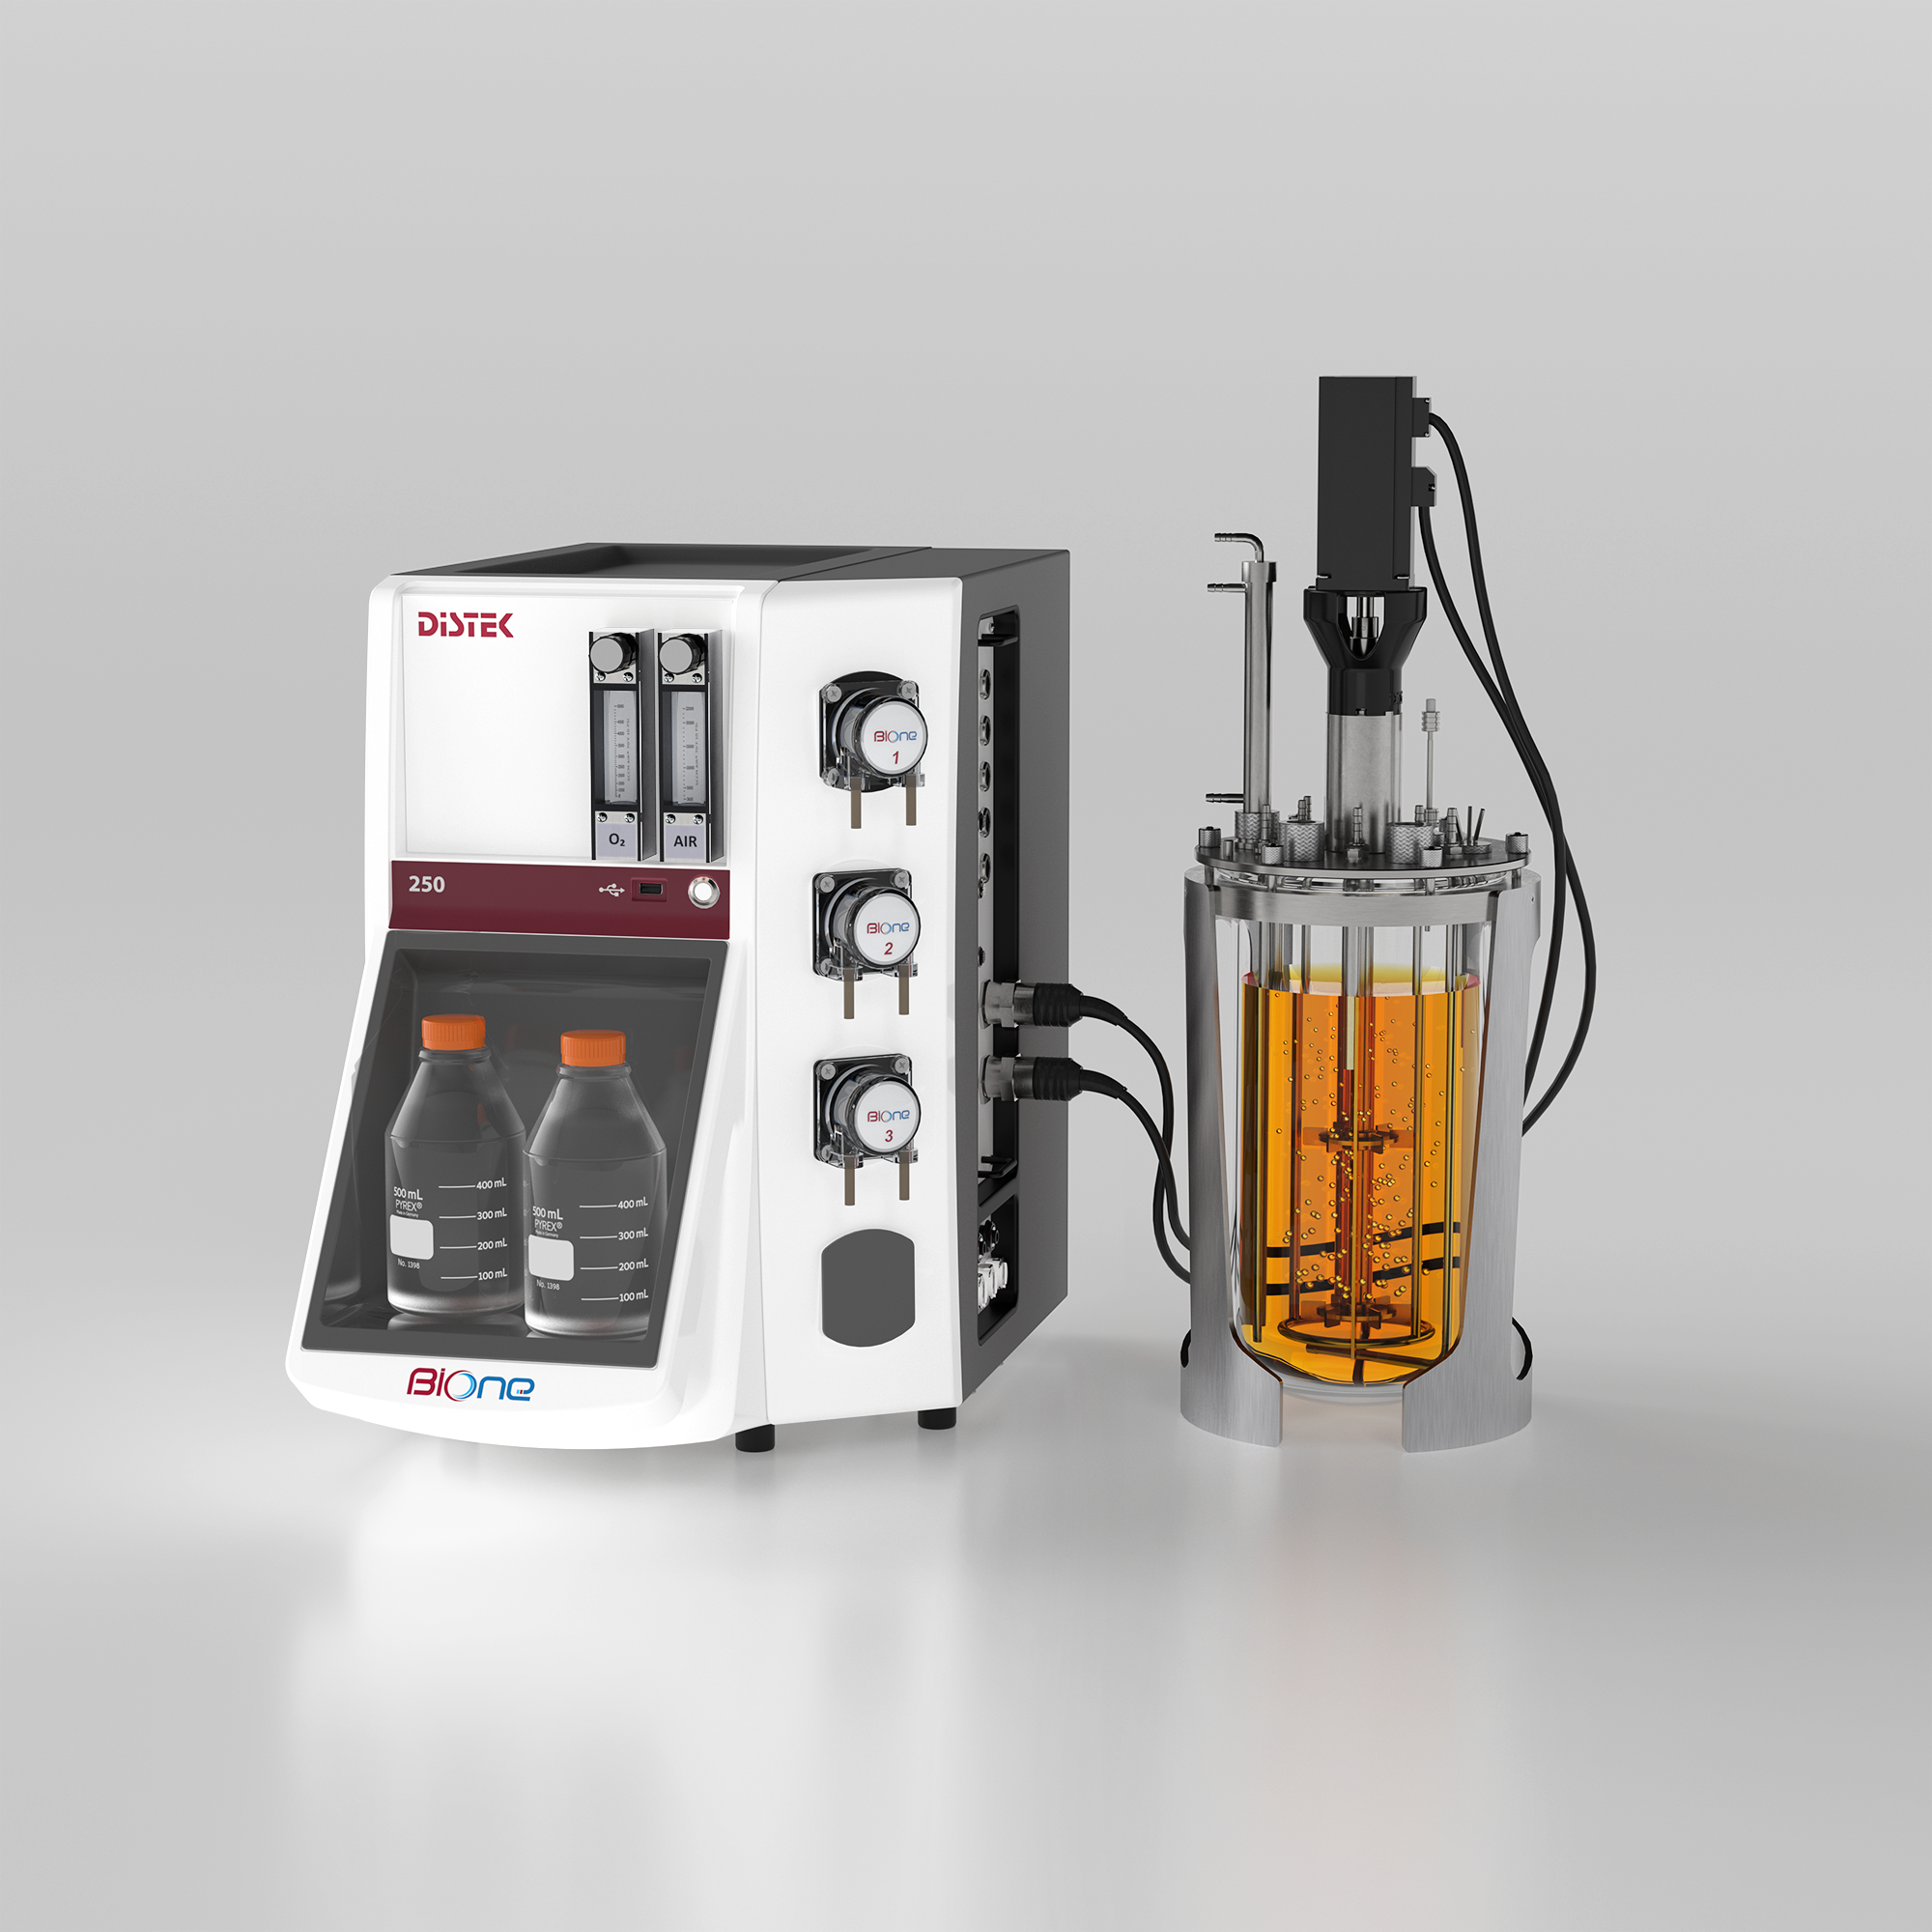 A budget friendly bioprocess control station for microbial applications